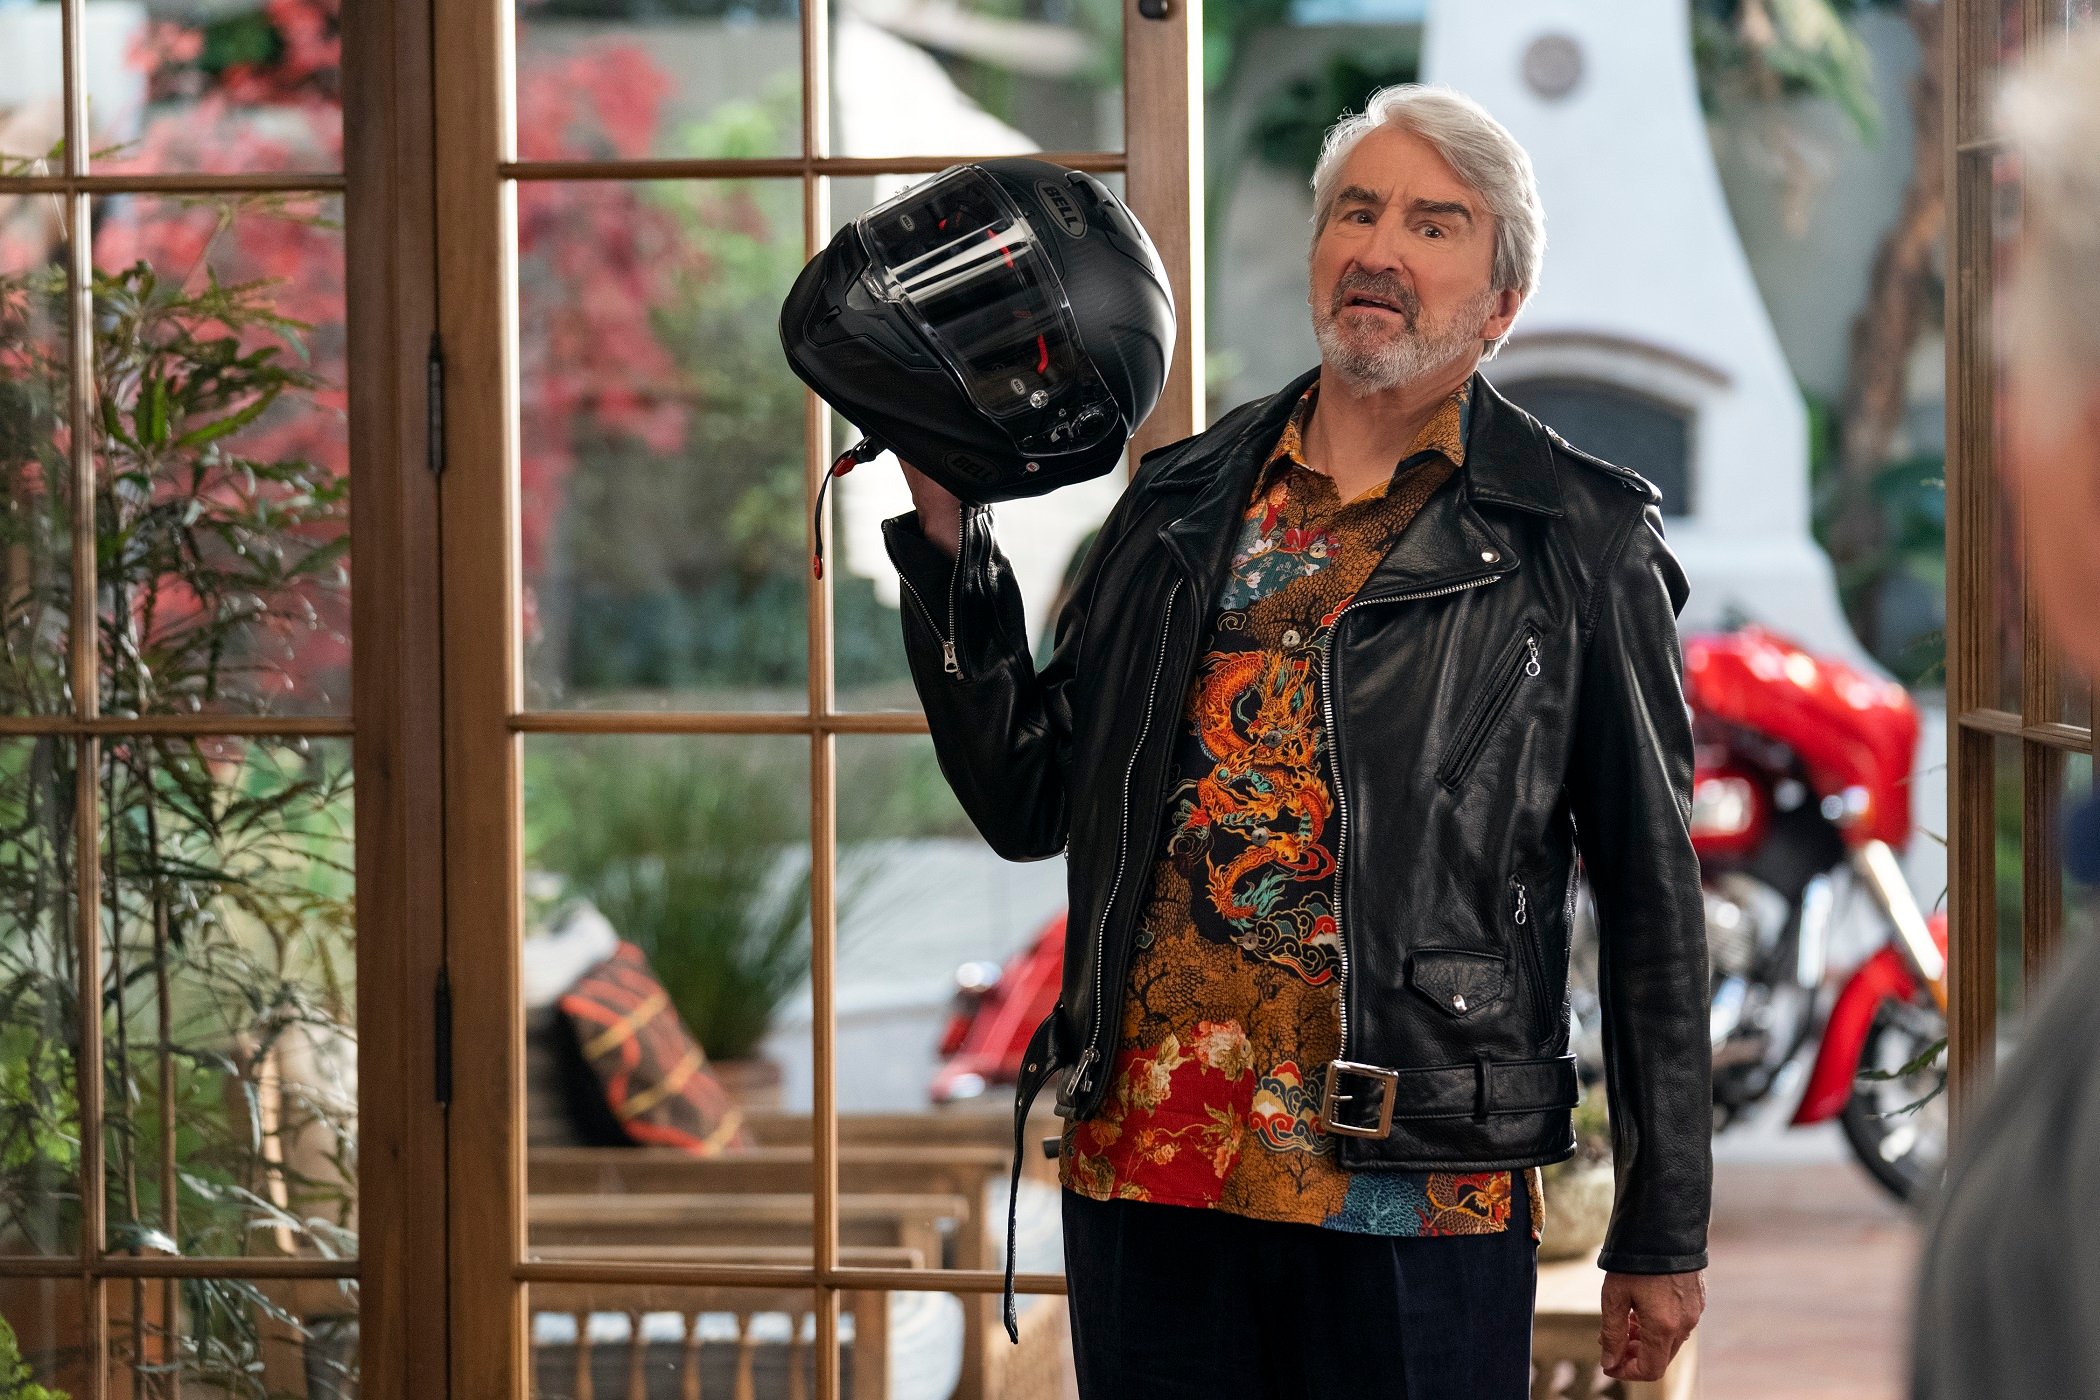 Sol Bergstein holds a motorcylce helmet after a large, impulse purchase in season 6 of 'Grace and Frankie' 